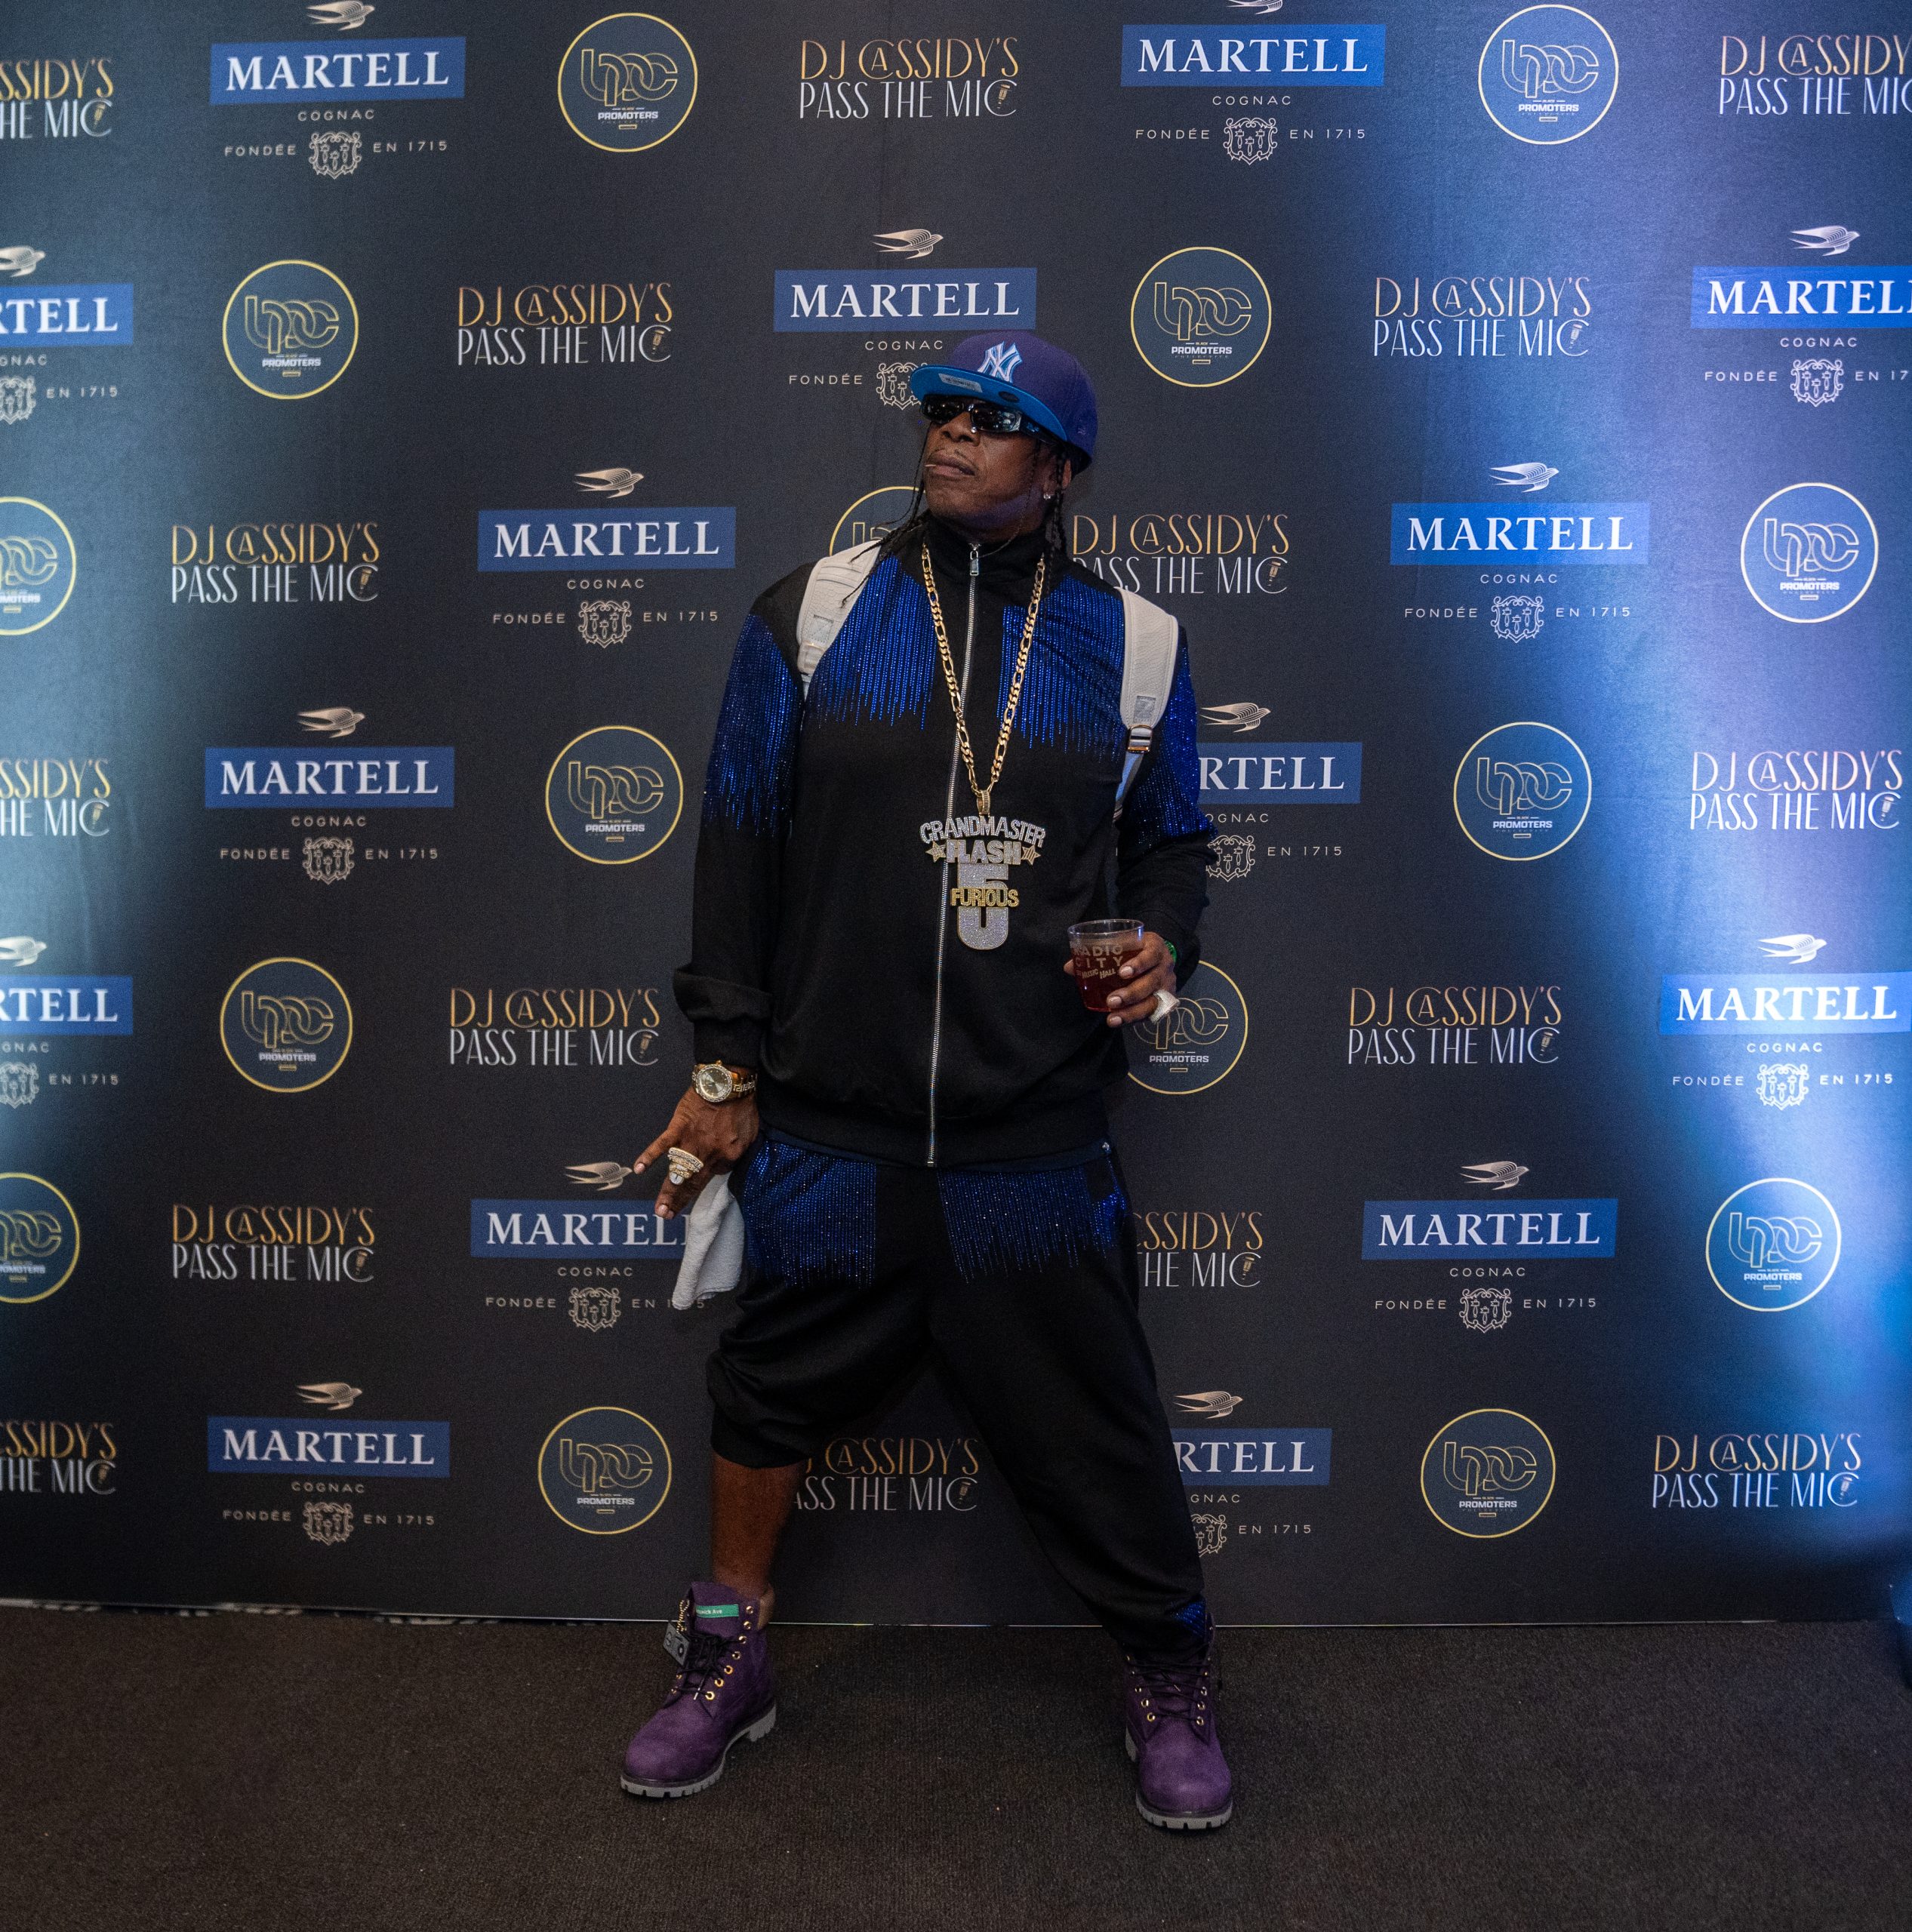 Grandmaster Flash - Martell Cognac, The Black Promoters Collective, and Power 105.1 present DJ Cassidy's Pass The Mic LIVE at Radio City Music Hall in NYC